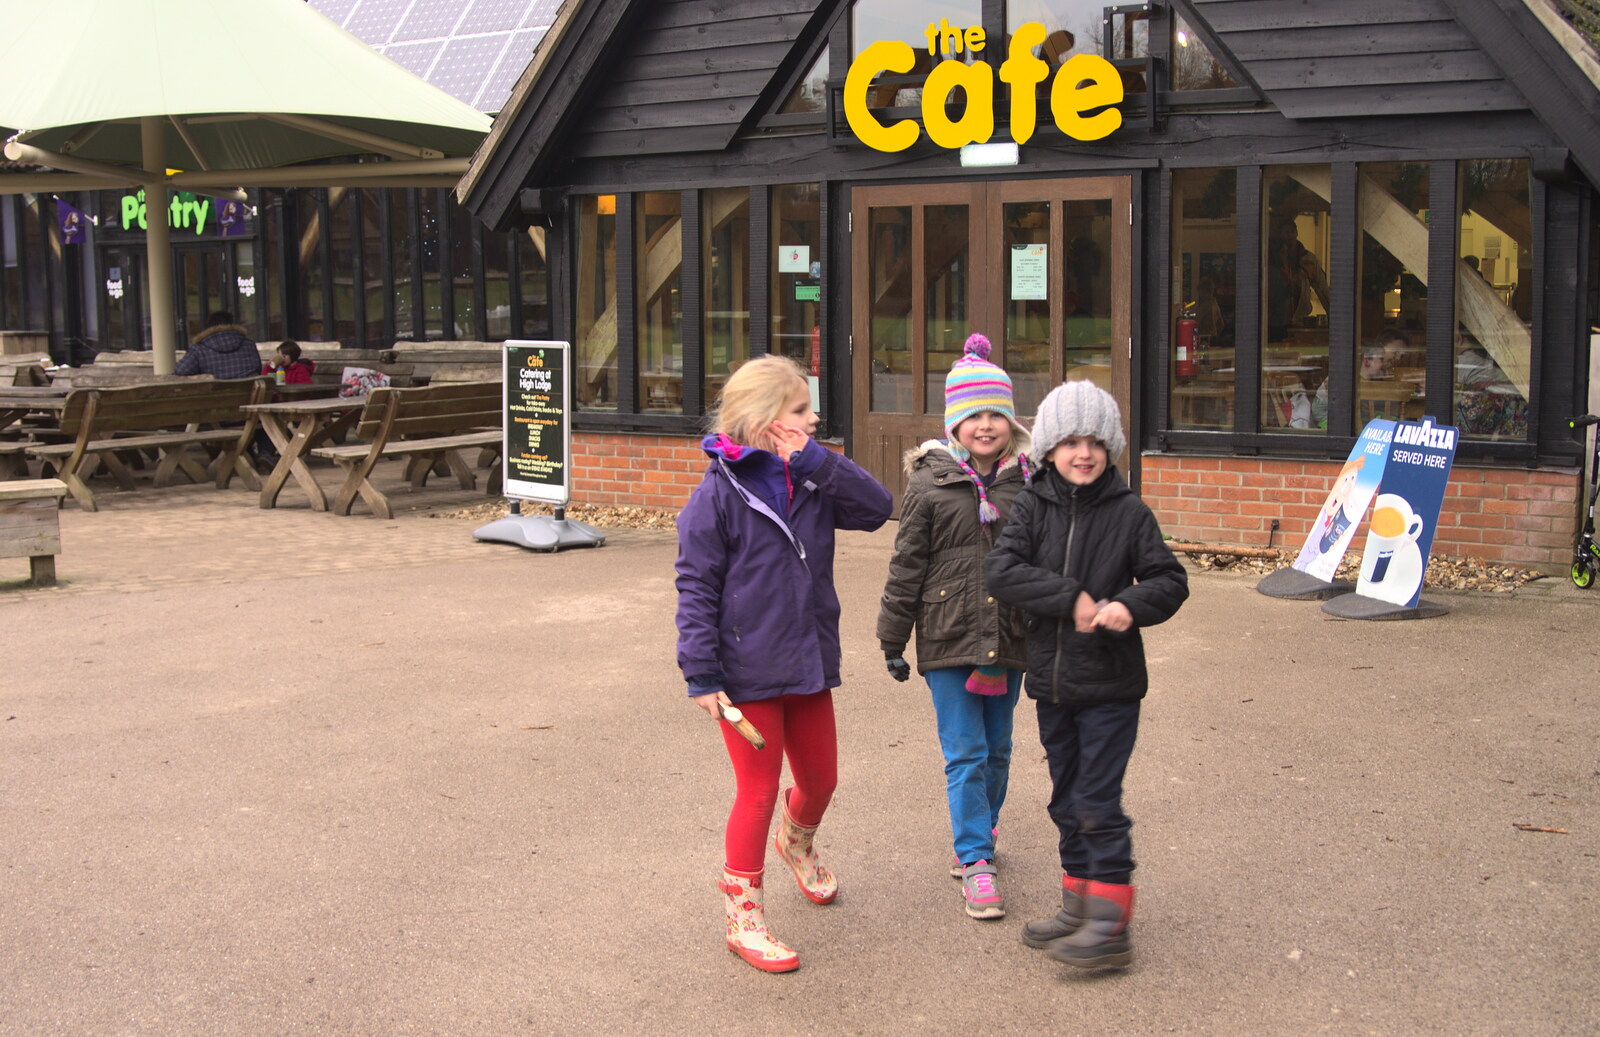 Outside the café from A Day at High Lodge, Brandon, Suffolk - 3rd January 2017